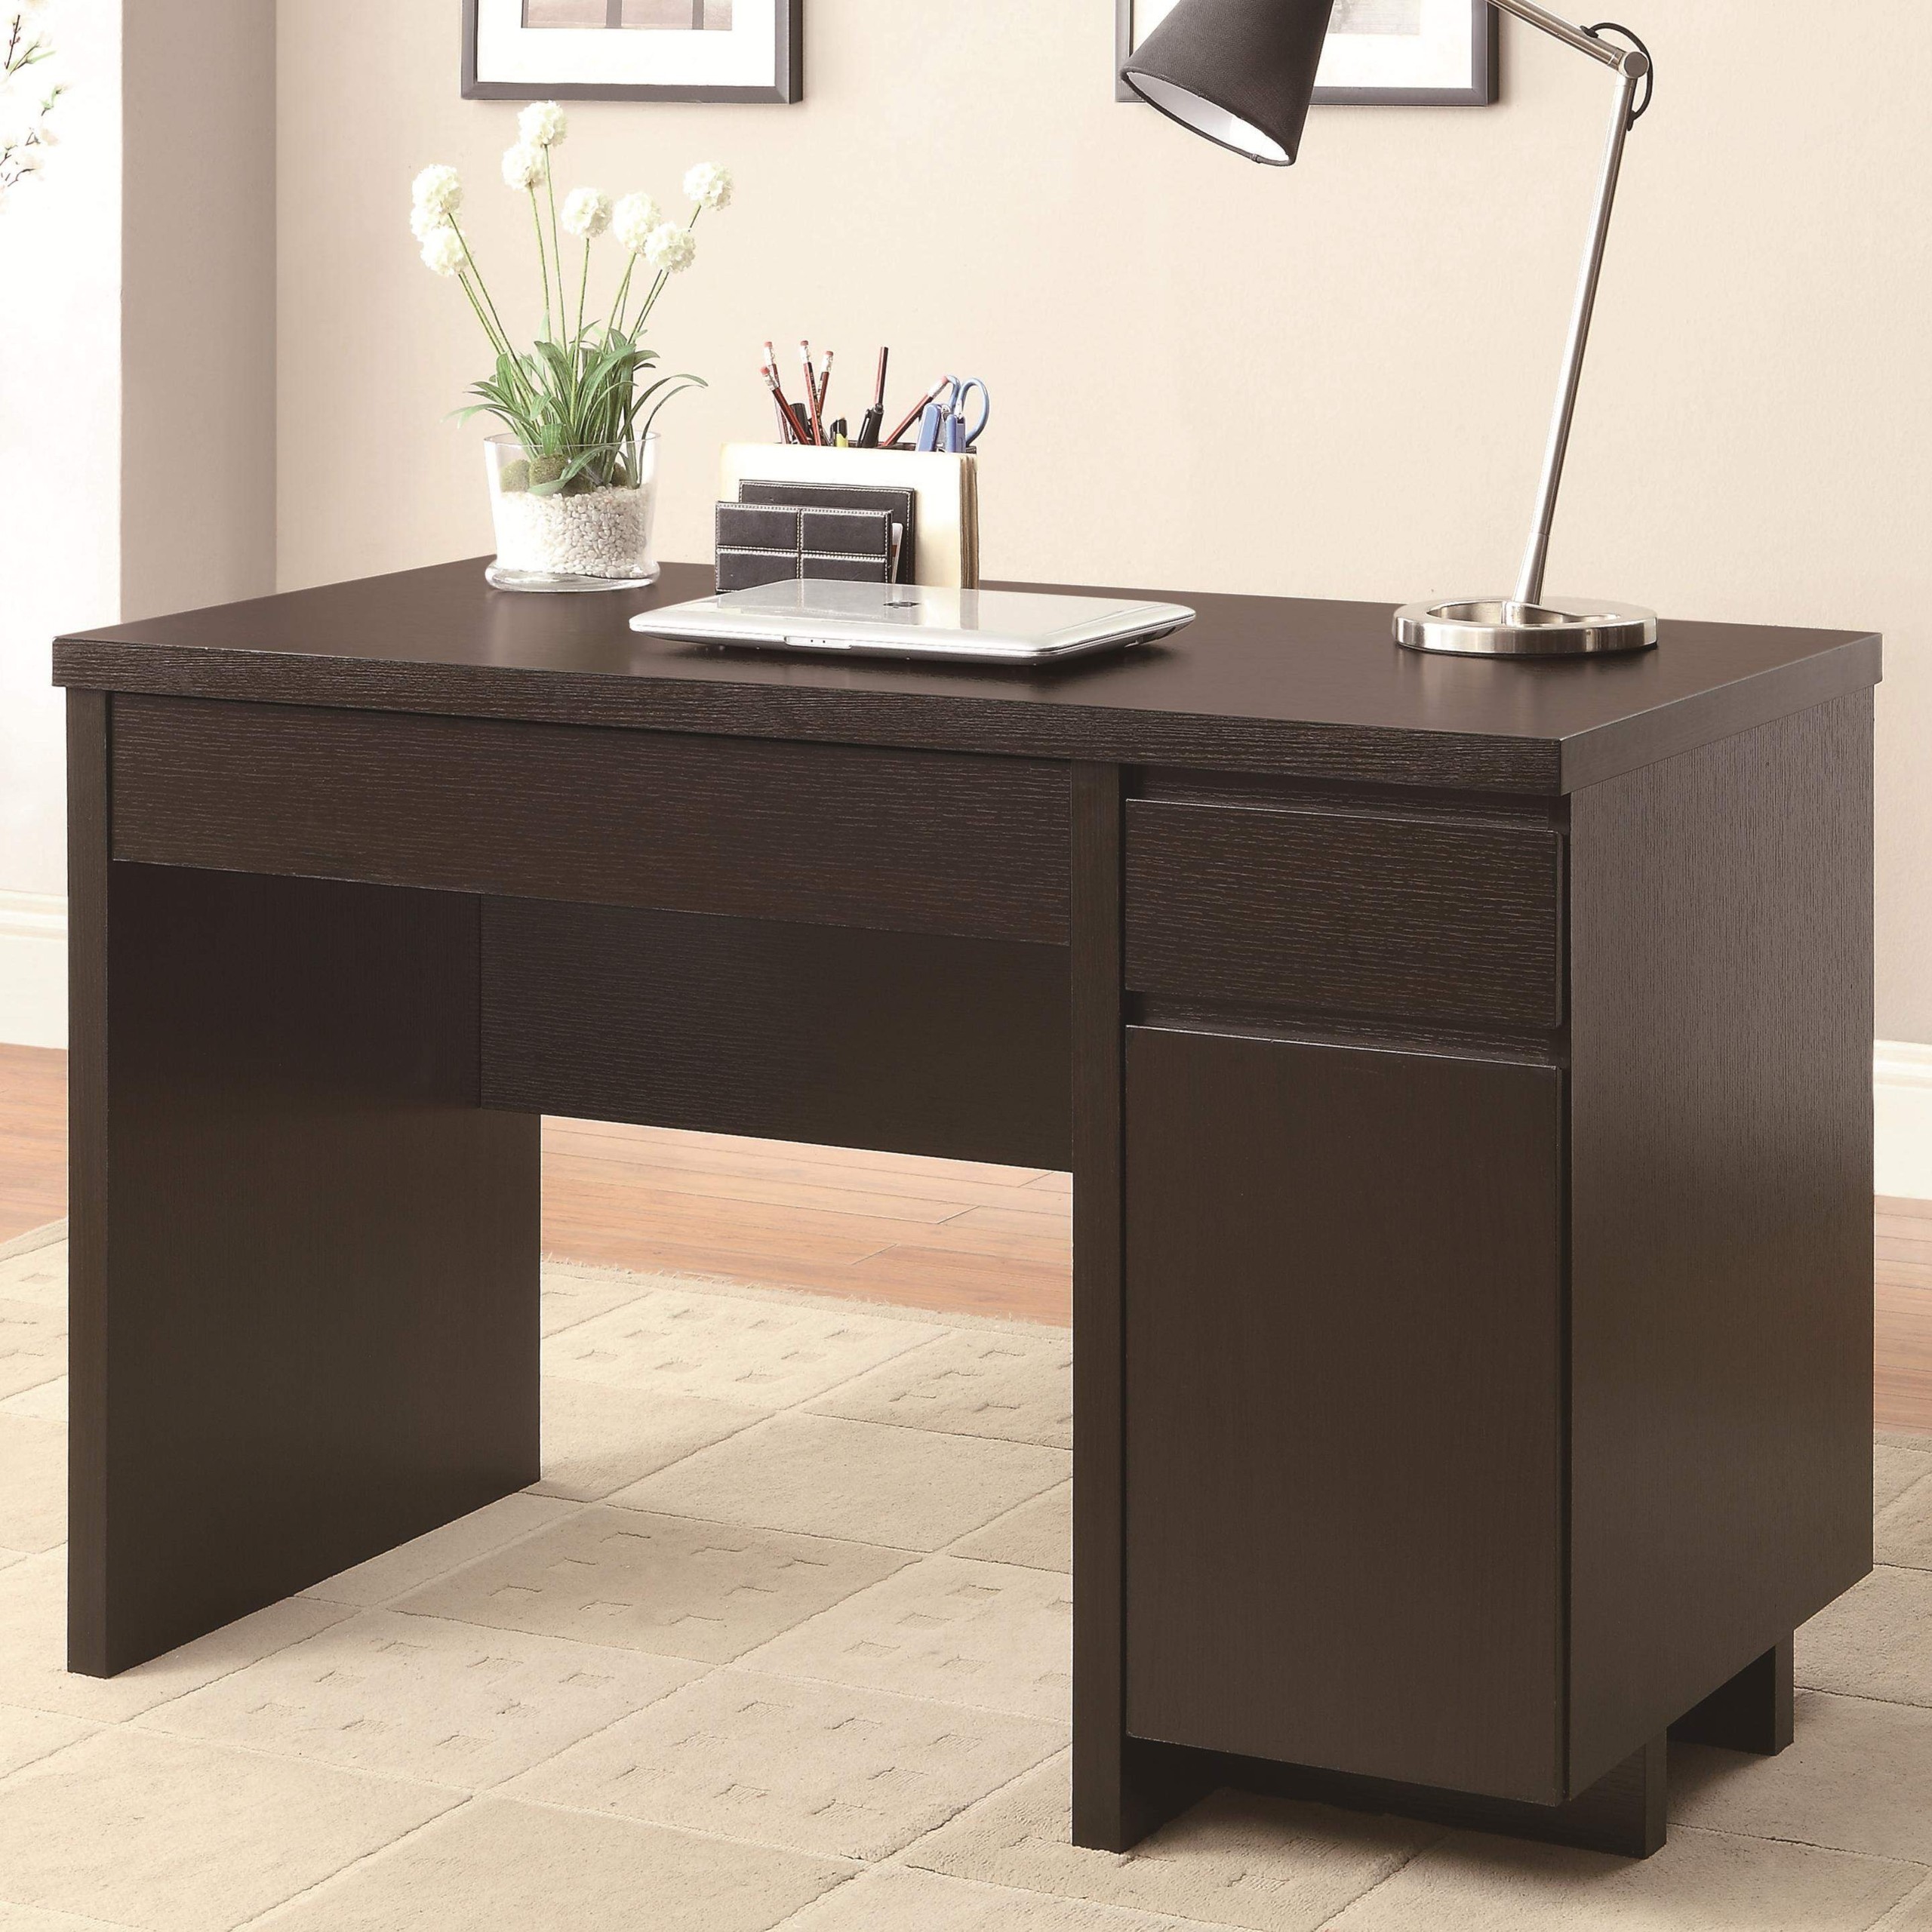 Small desk with drawer cabinet in wenge finish